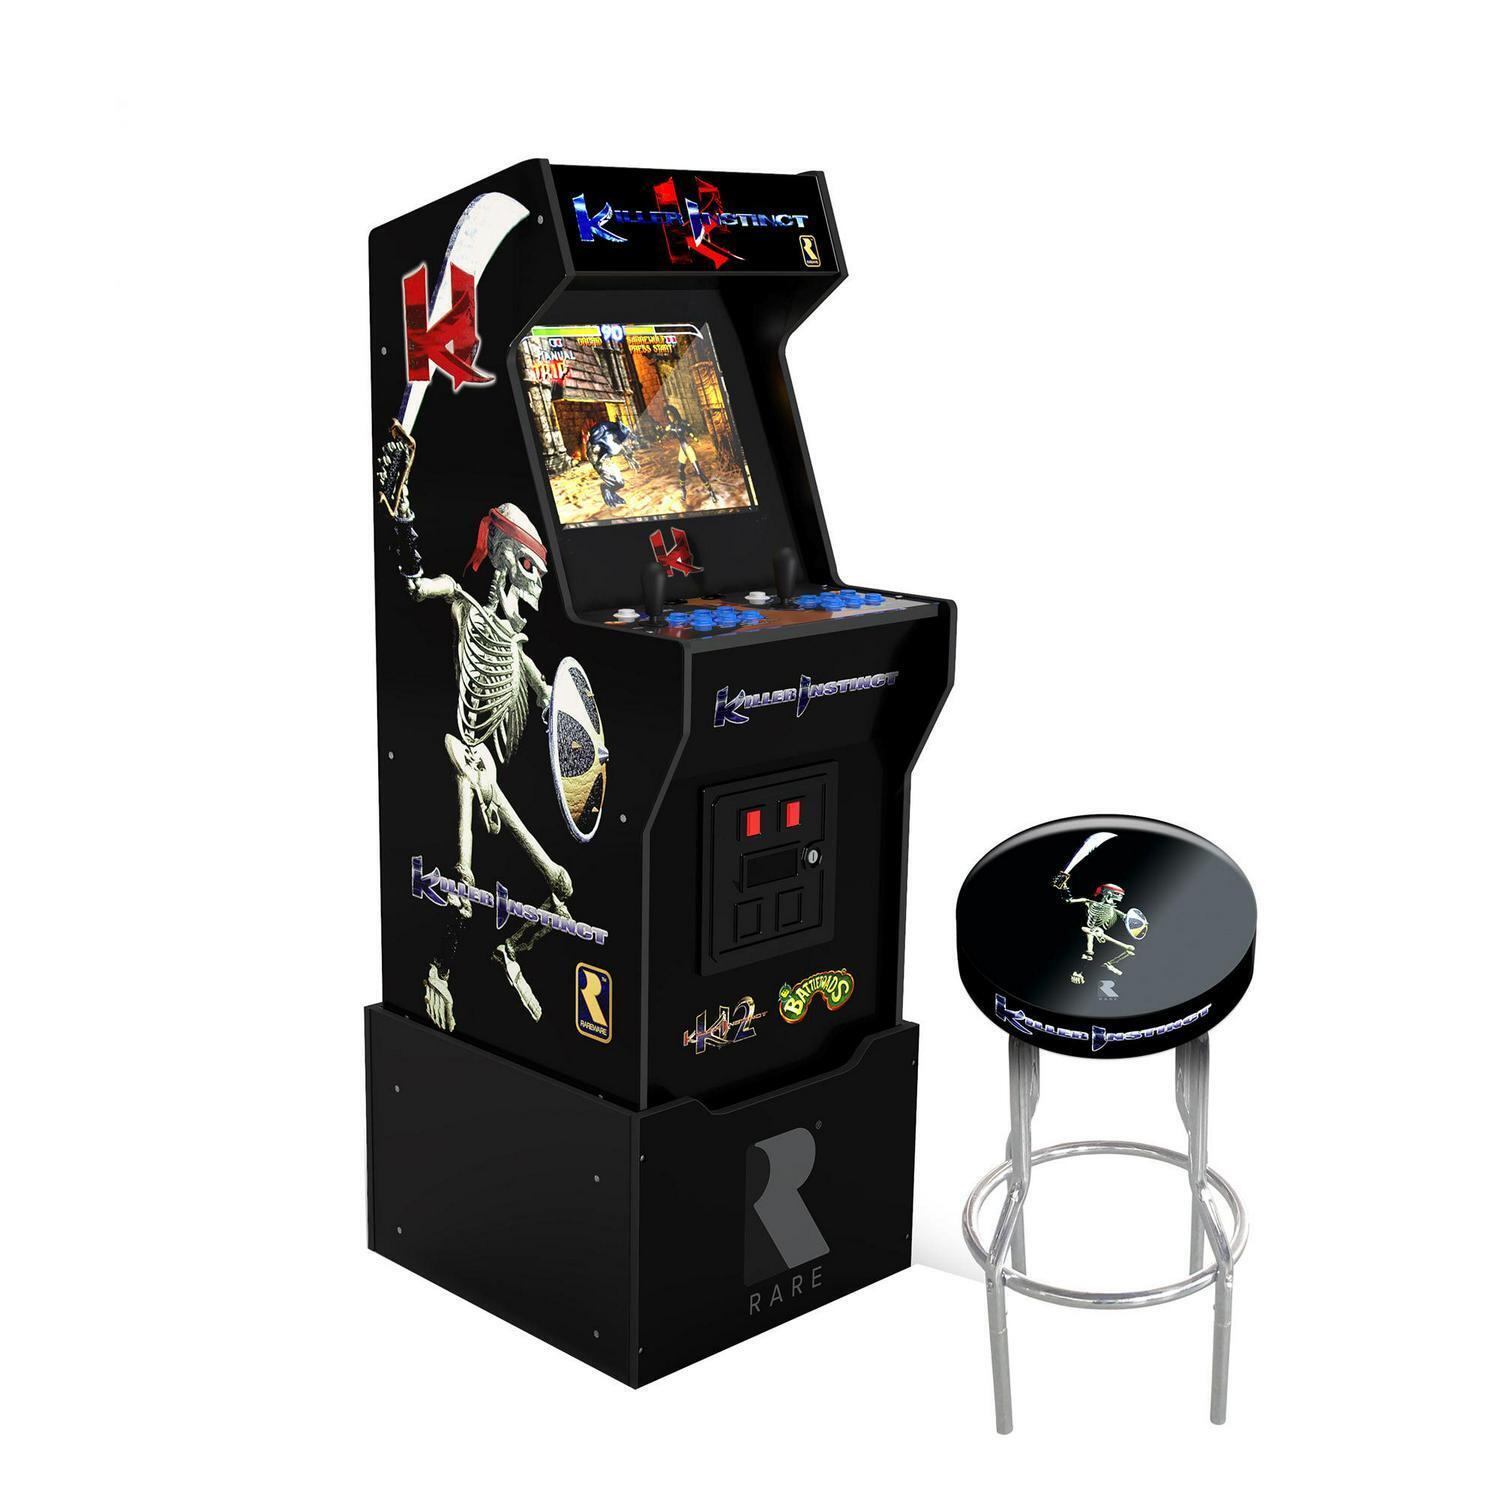 Arcade1Up - Killer Instinct Arcade with Riser, Lit Marquee, Lit Deck, Wi-Fi, and